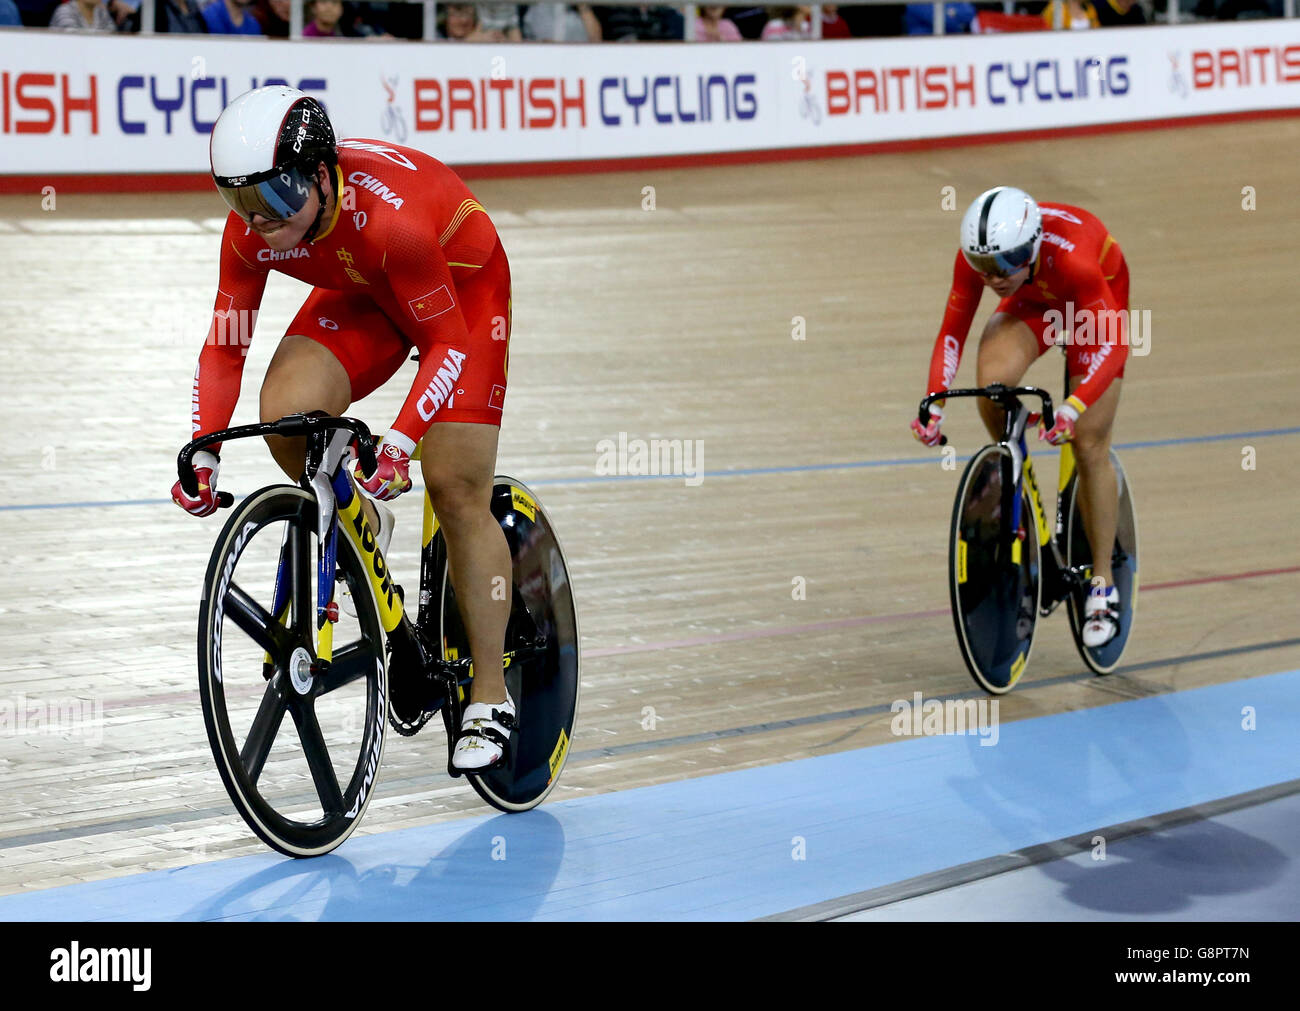 China's Tianshi Zhong (left) and Jijnje Gong compete in the Women's Team Sprint during day one of the UCI Track Cycling World Championships at Lee Valley VeloPark, London. Stock Photo